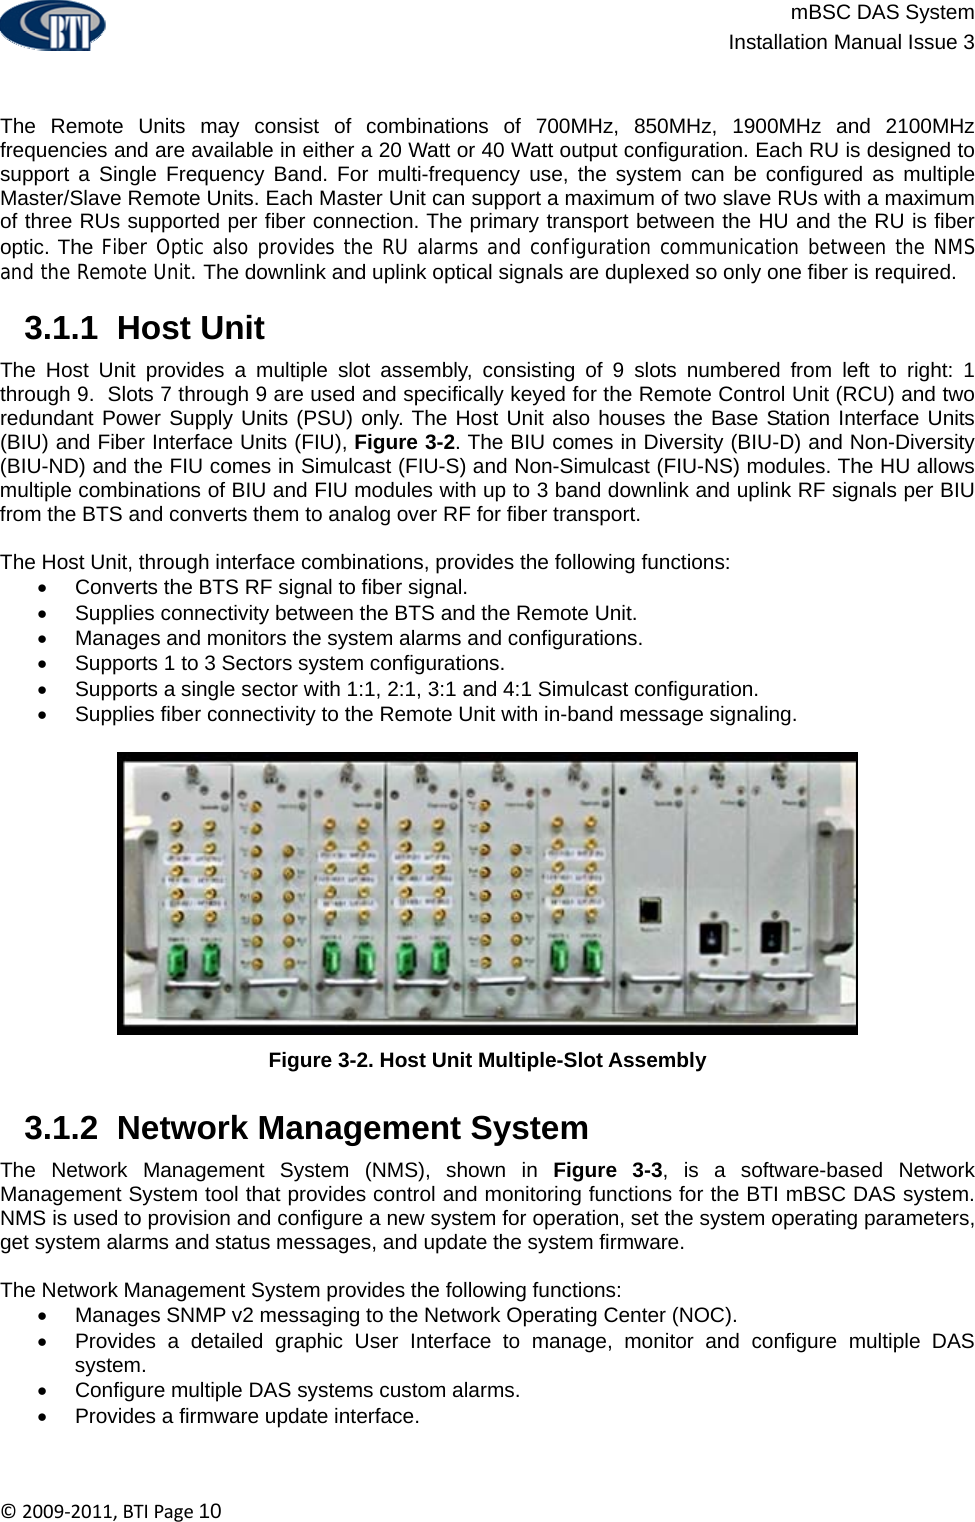                          mBSC DAS System  Installation Manual Issue 3  ©2009‐2011,BTIPage10   The Remote Units may consist of combinations of 700MHz, 850MHz, 1900MHz and 2100MHz frequencies and are available in either a 20 Watt or 40 Watt output configuration. Each RU is designed to support a Single Frequency Band. For multi-frequency use, the system can be configured as multiple Master/Slave Remote Units. Each Master Unit can support a maximum of two slave RUs with a maximum of three RUs supported per fiber connection. The primary transport between the HU and the RU is fiber optic. The Fiber Optic also provides the RU alarms and configuration communication between the NMS and the Remote Unit. The downlink and uplink optical signals are duplexed so only one fiber is required.   3.1.1  Host Unit The Host Unit provides a multiple slot assembly, consisting of 9 slots numbered from left to right: 1 through 9.  Slots 7 through 9 are used and specifically keyed for the Remote Control Unit (RCU) and two redundant Power Supply Units (PSU) only. The Host Unit also houses the Base Station Interface Units (BIU) and Fiber Interface Units (FIU), Figure 3-2. The BIU comes in Diversity (BIU-D) and Non-Diversity (BIU-ND) and the FIU comes in Simulcast (FIU-S) and Non-Simulcast (FIU-NS) modules. The HU allows multiple combinations of BIU and FIU modules with up to 3 band downlink and uplink RF signals per BIU from the BTS and converts them to analog over RF for fiber transport.   The Host Unit, through interface combinations, provides the following functions: •  Converts the BTS RF signal to fiber signal. •  Supplies connectivity between the BTS and the Remote Unit. •  Manages and monitors the system alarms and configurations. •  Supports 1 to 3 Sectors system configurations. •  Supports a single sector with 1:1, 2:1, 3:1 and 4:1 Simulcast configuration. •  Supplies fiber connectivity to the Remote Unit with in-band message signaling.  Figure 3-2. Host Unit Multiple-Slot Assembly   3.1.2  Network Management System The Network Management System (NMS), shown in Figure 3-3, is a software-based Network Management System tool that provides control and monitoring functions for the BTI mBSC DAS system. NMS is used to provision and configure a new system for operation, set the system operating parameters, get system alarms and status messages, and update the system firmware.  The Network Management System provides the following functions: •  Manages SNMP v2 messaging to the Network Operating Center (NOC). •  Provides a detailed graphic User Interface to manage, monitor and configure multiple DAS system. •  Configure multiple DAS systems custom alarms. •  Provides a firmware update interface. 